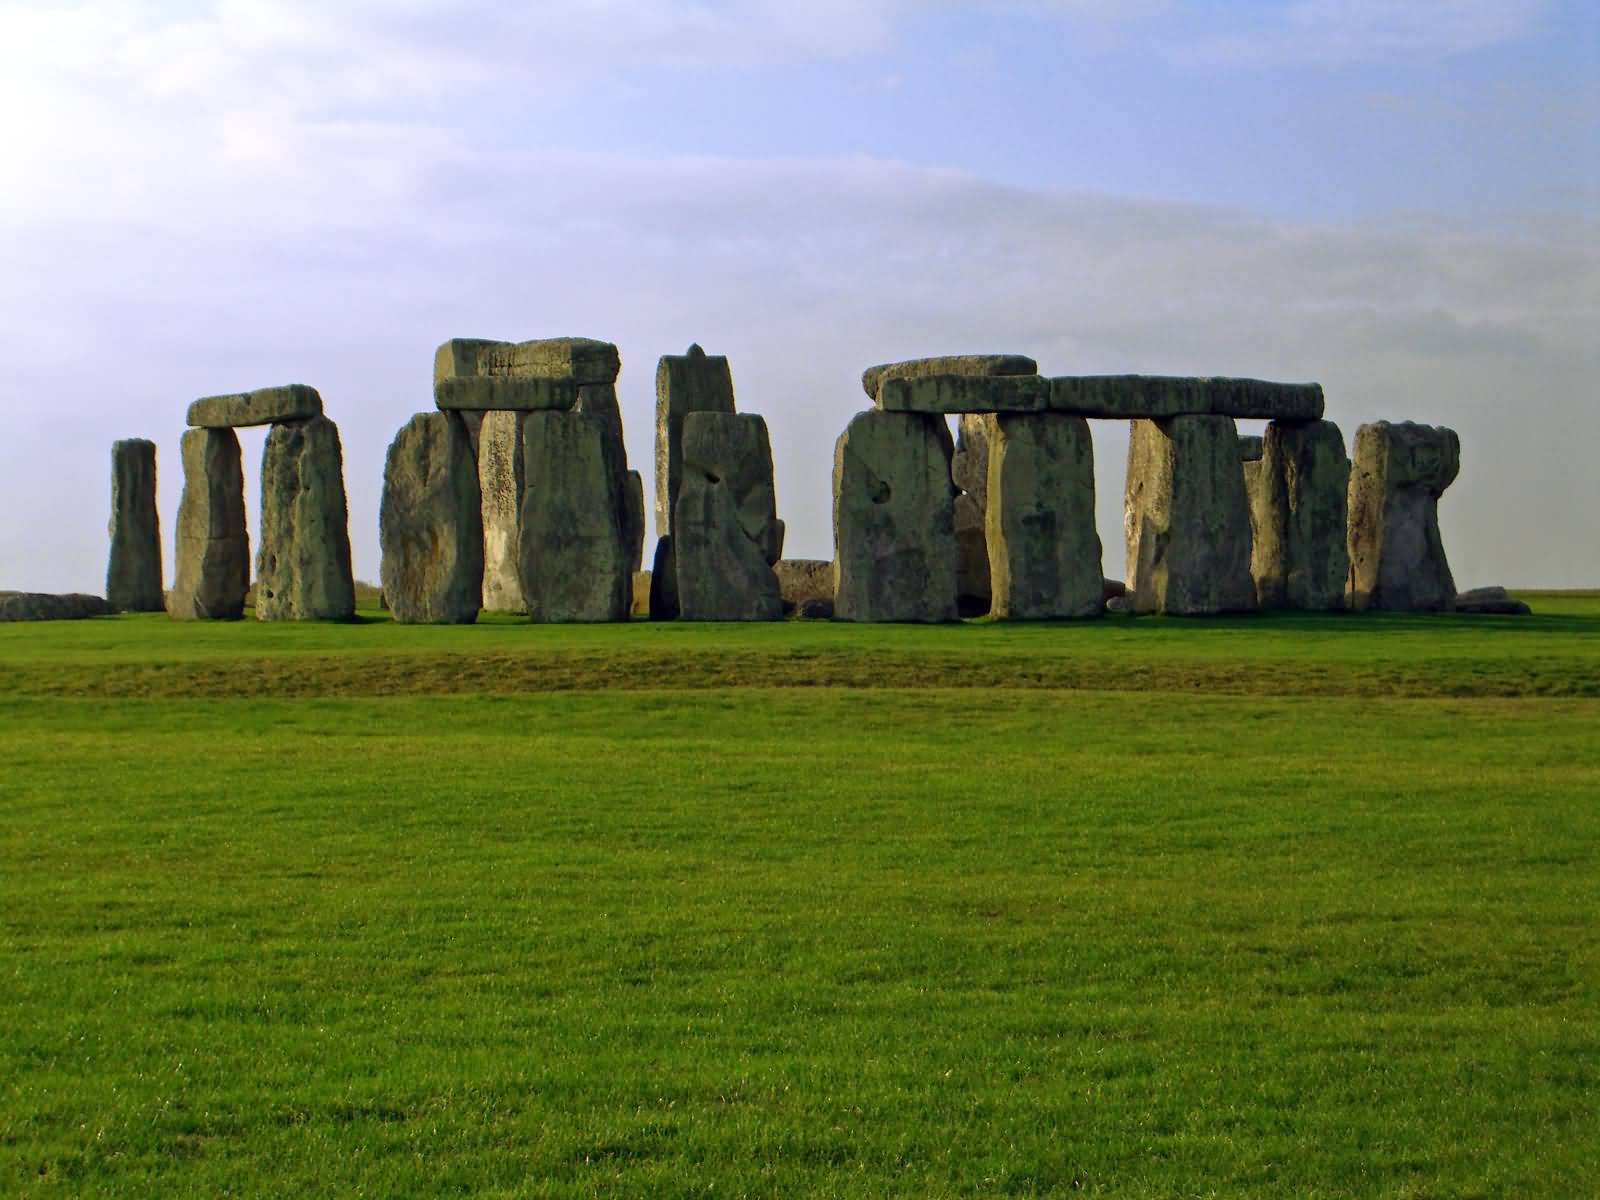 Distance View Of The Stonehenge Monument